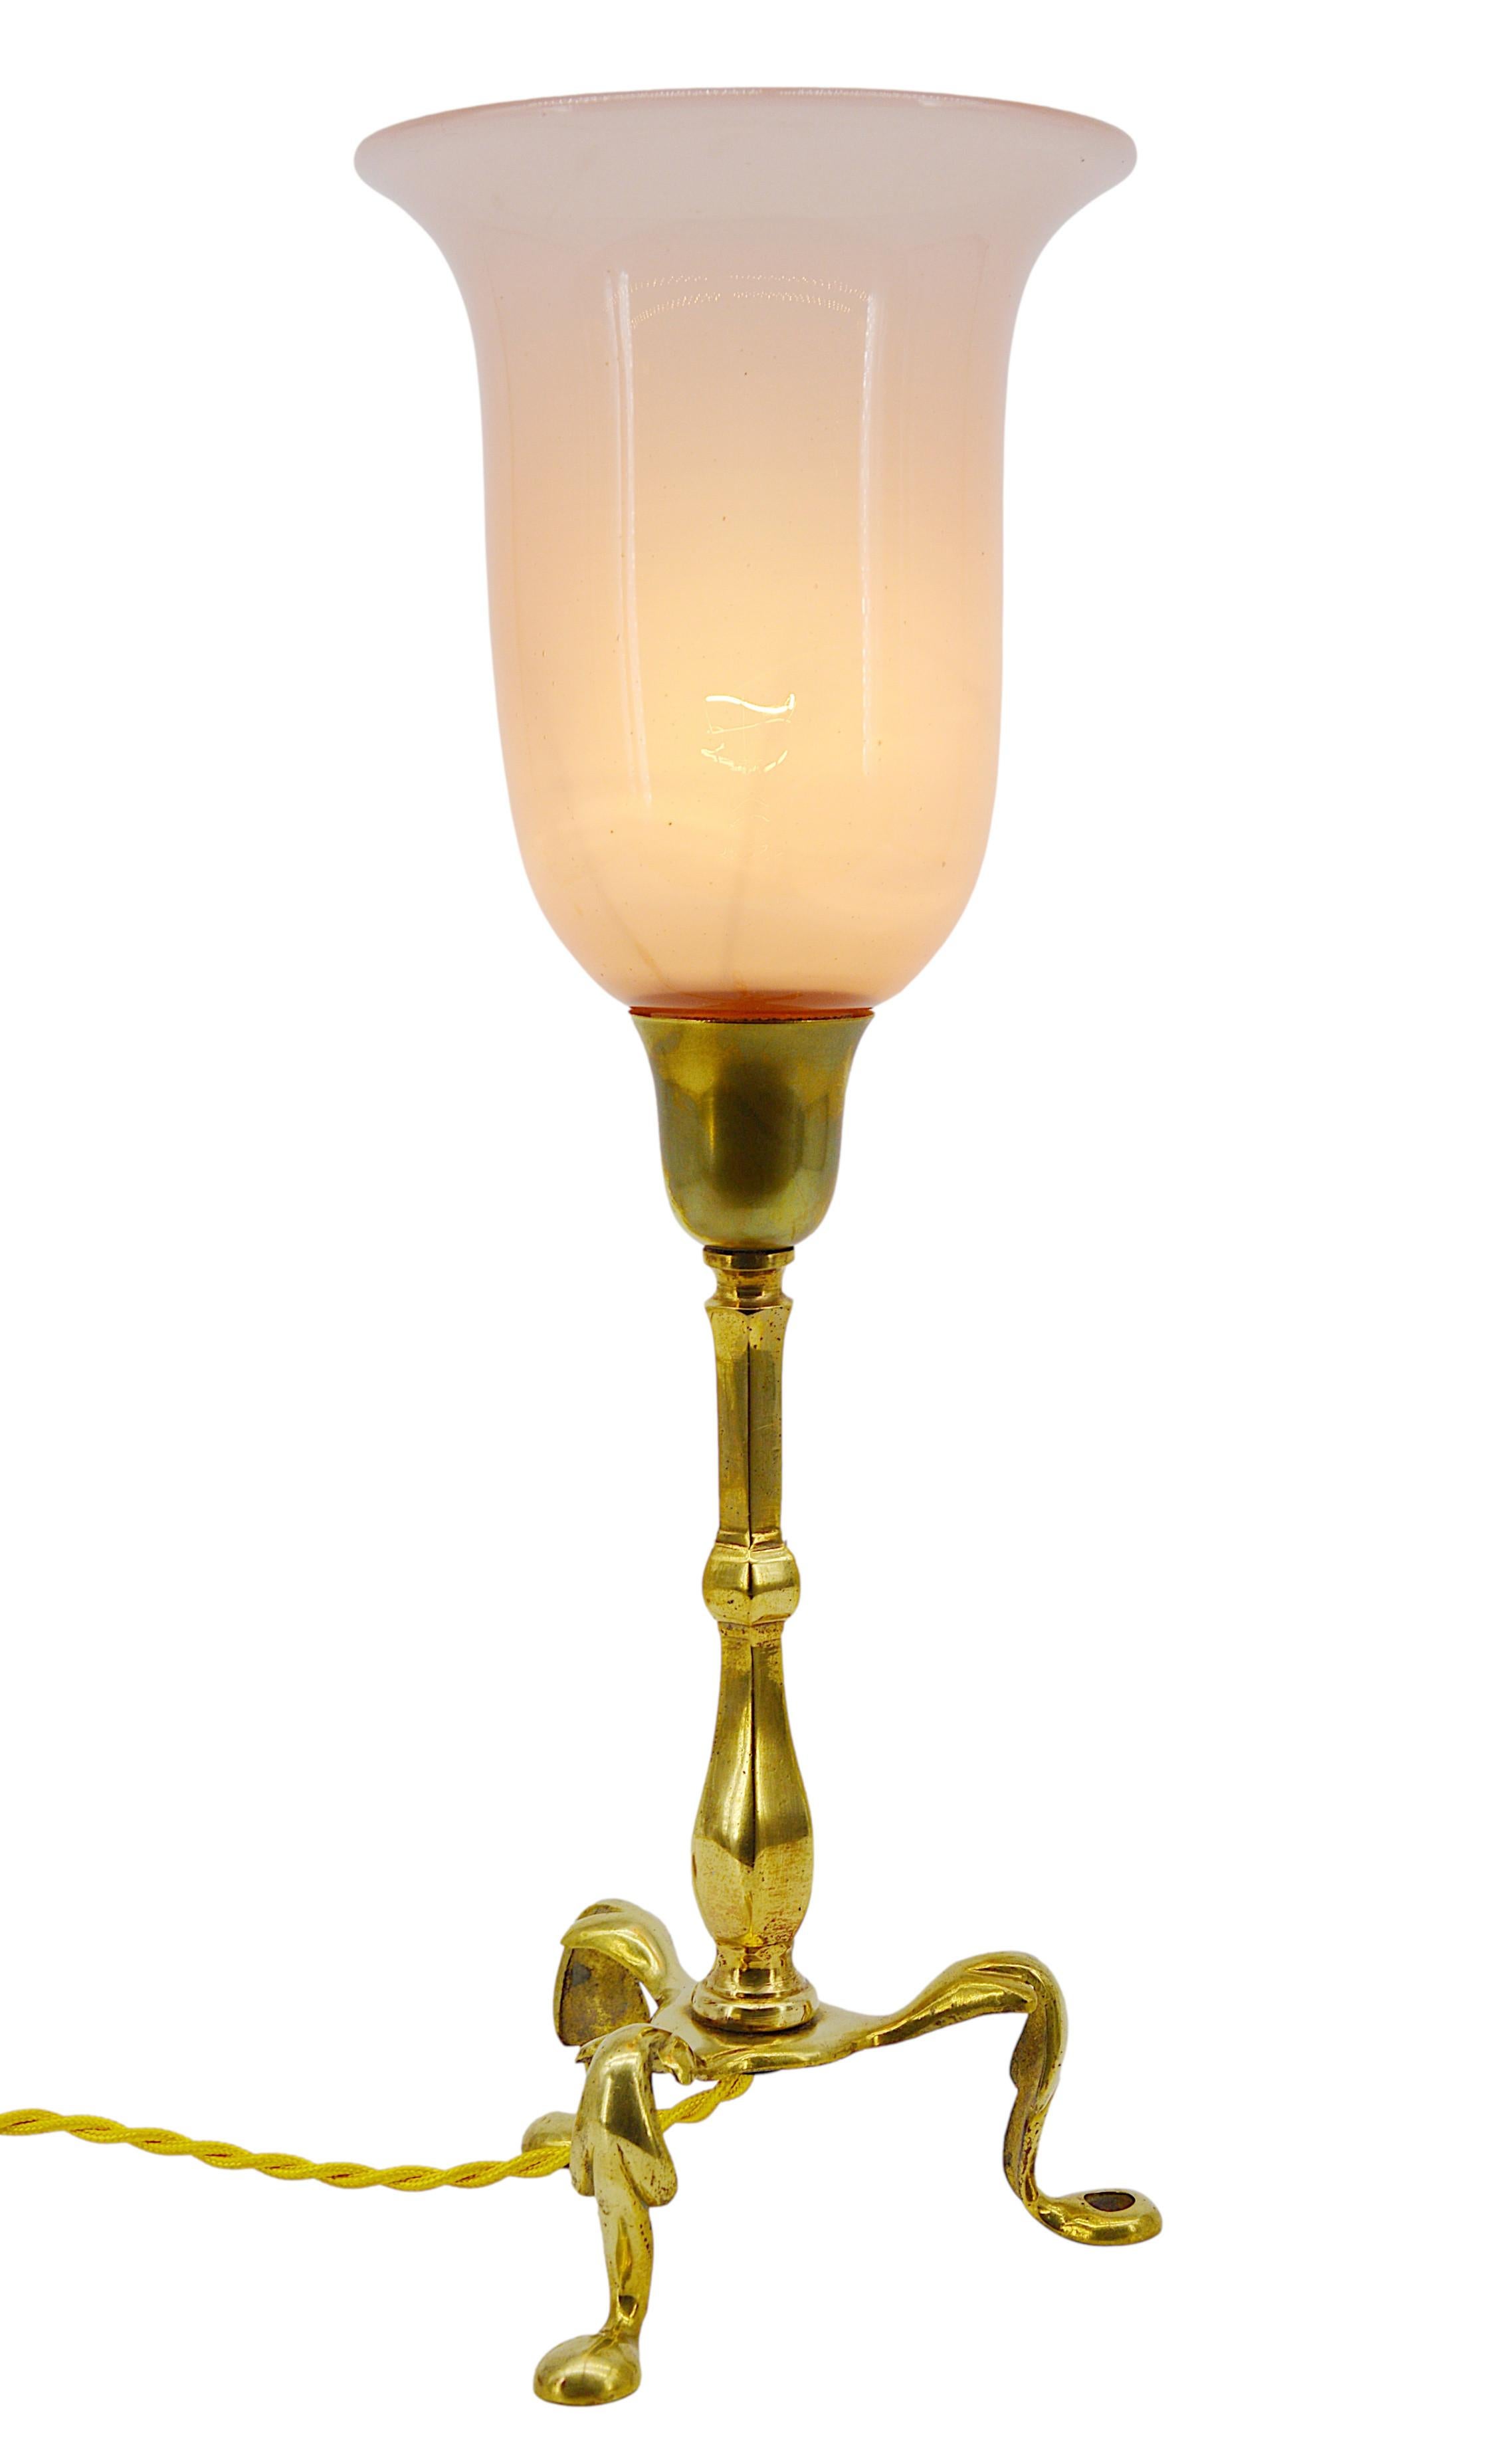 Pair of antique table lamps or wall sconces attributed to William Arthur Smith Benson, England, ca. 1900. Opaline glass and brass. Fine shades in opalin pink glass. Brass fixtures. Can be used as table lamps or wall sconces, a hole on a branch to